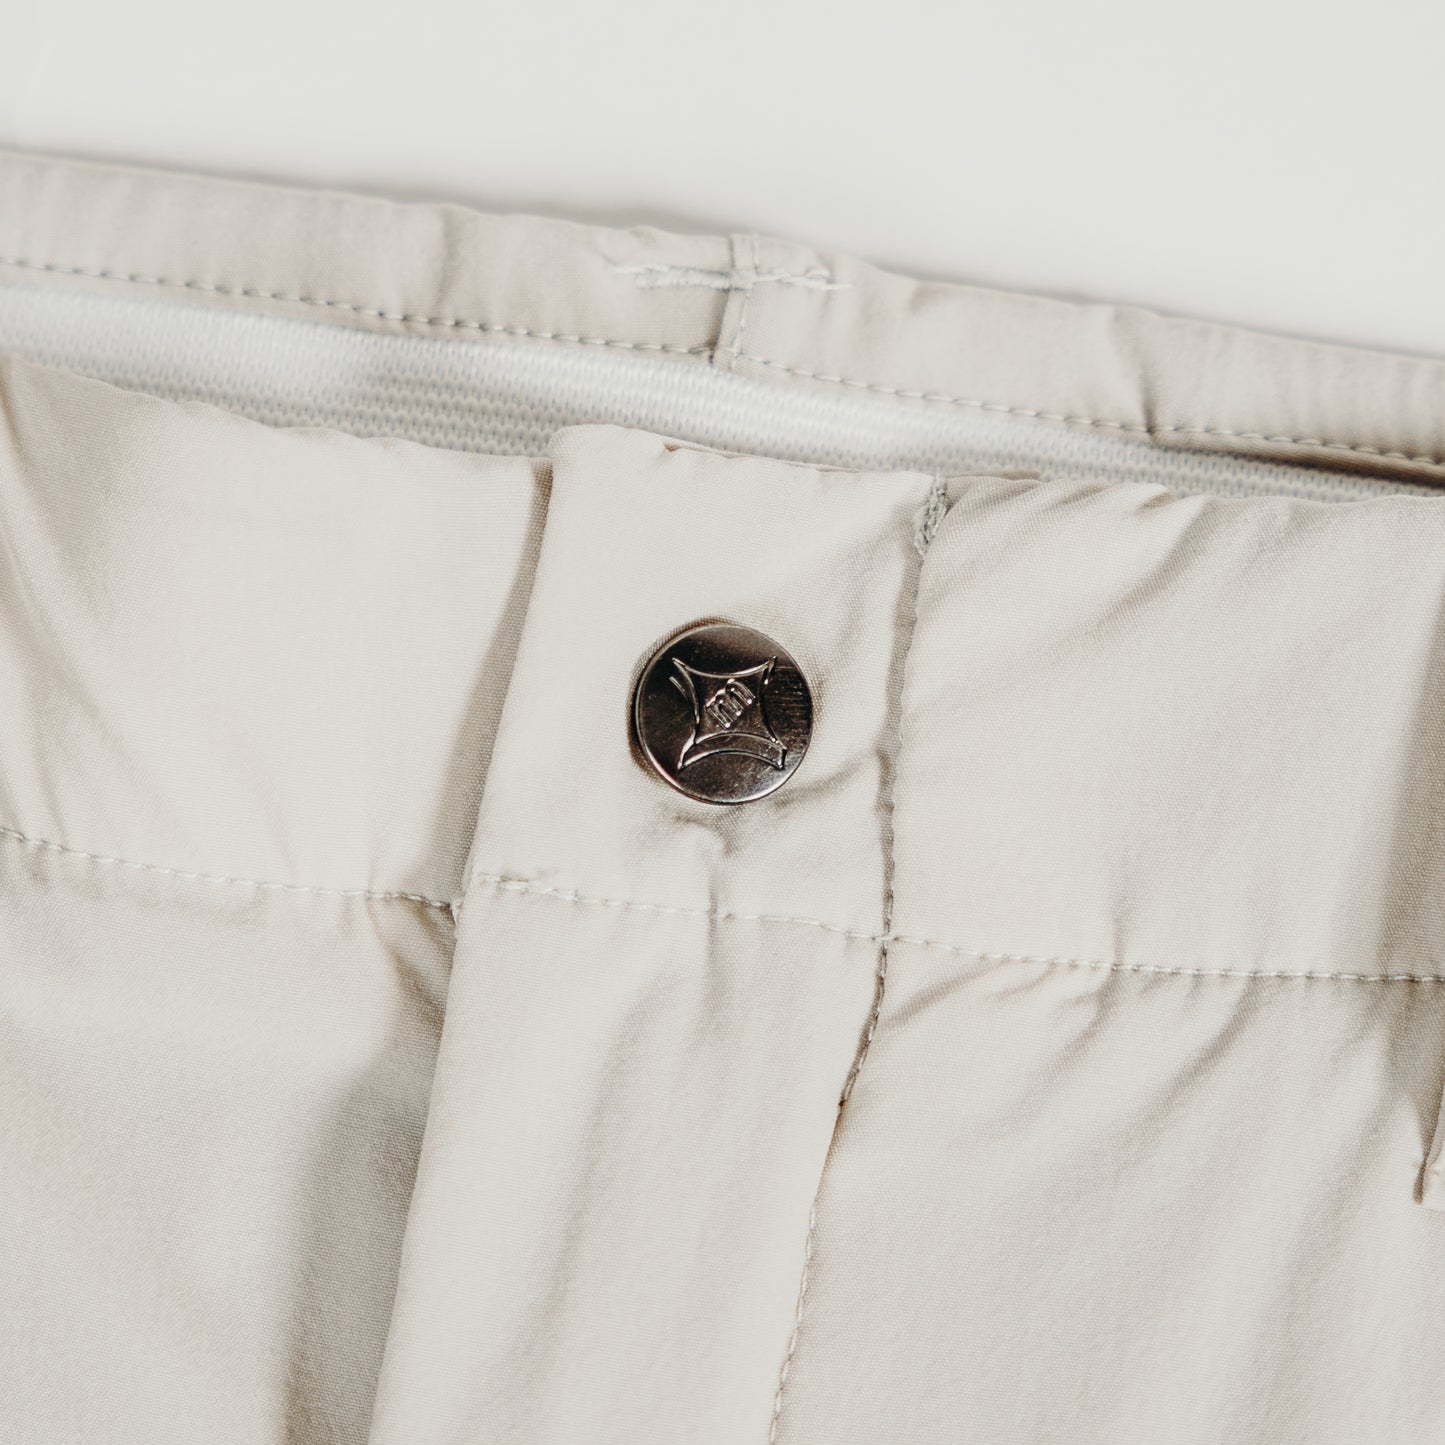 The Mckinley Pant (Frost Grey)